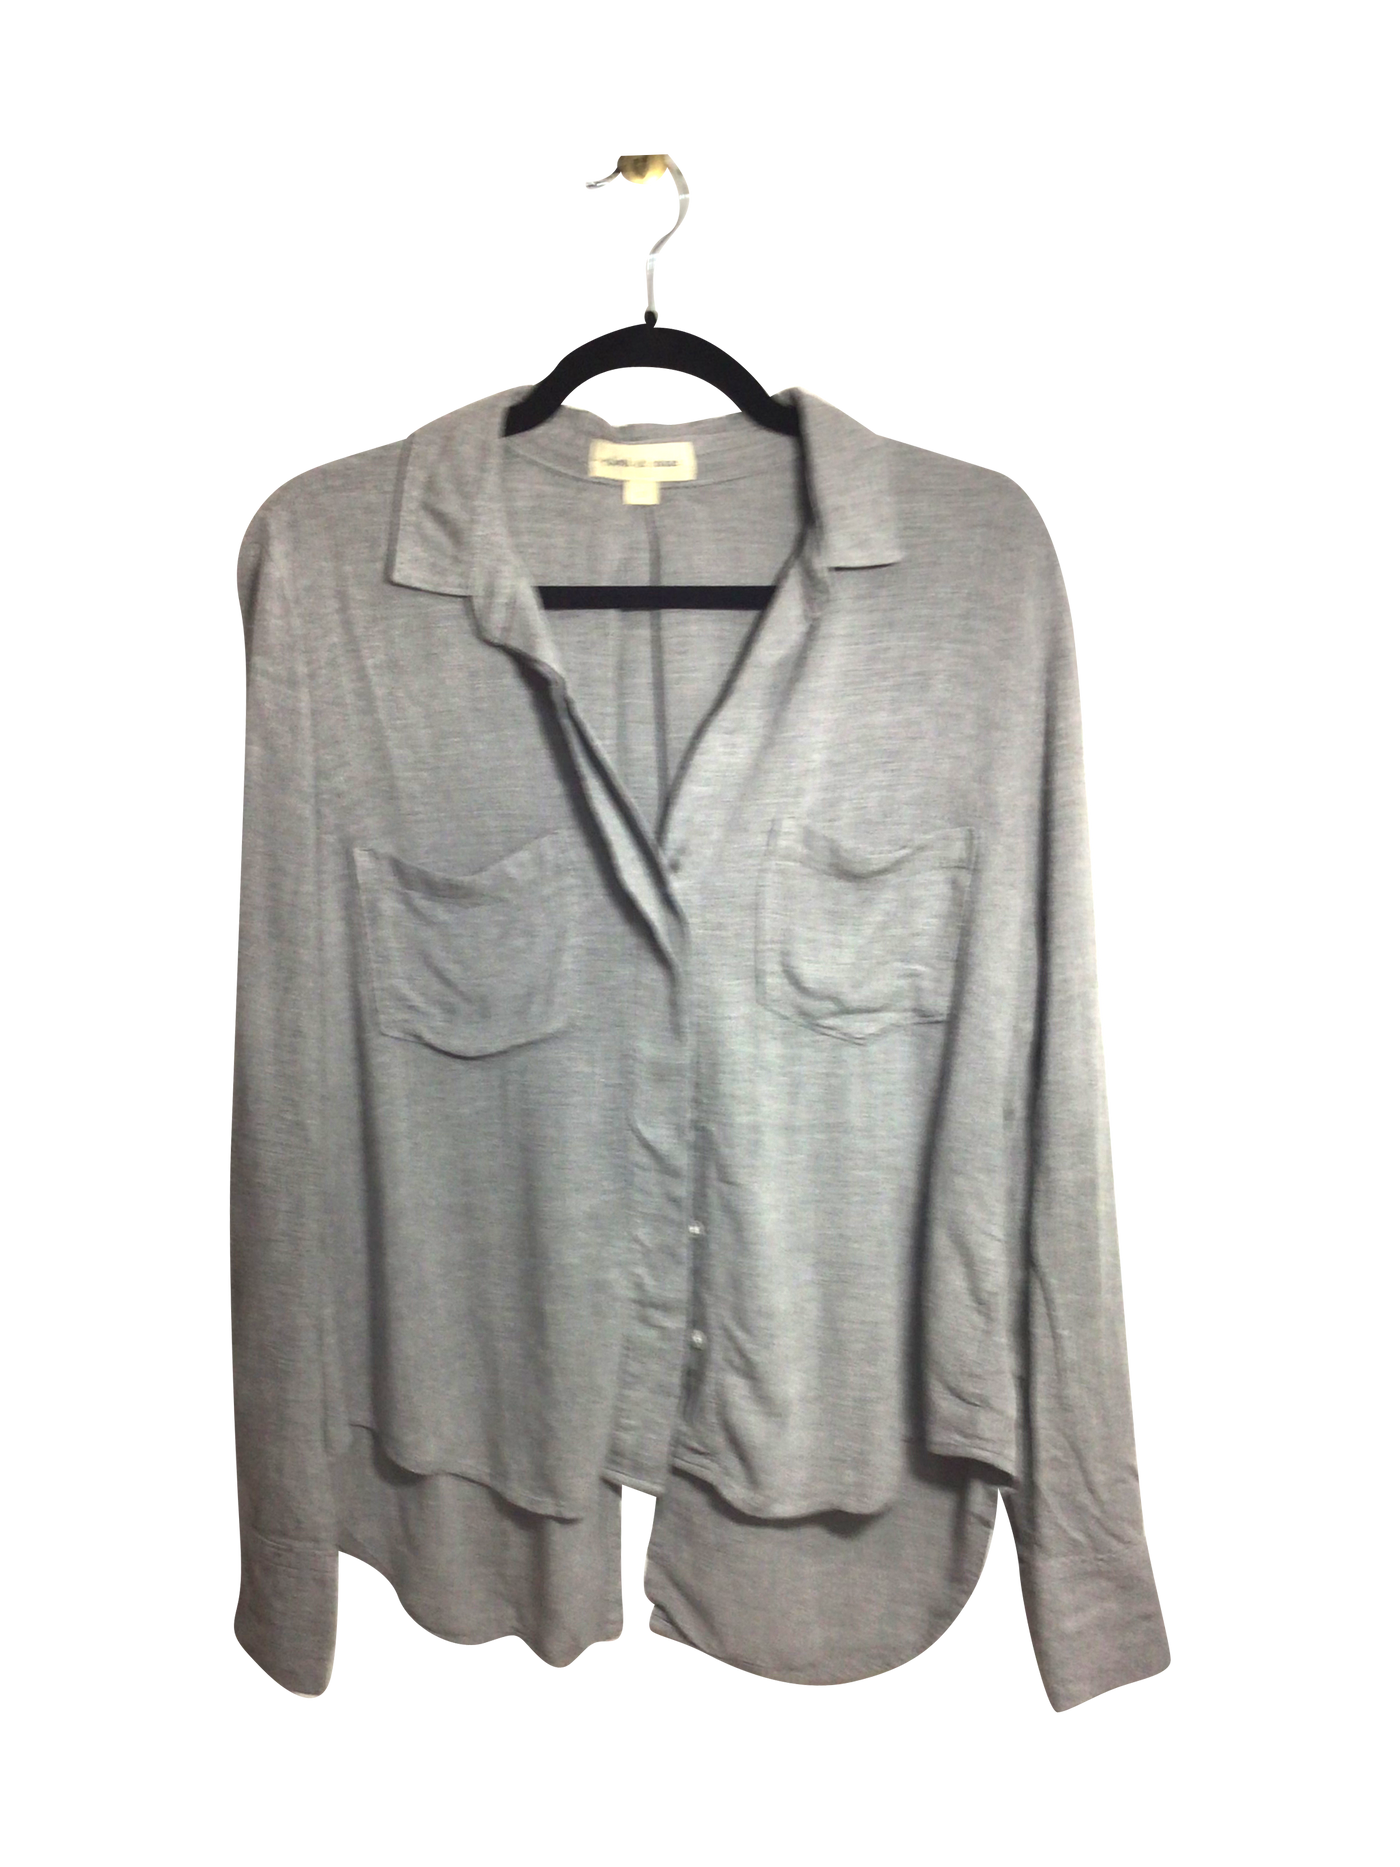 CLOTH & STONE Women Button Down Tops Regular fit in Gray - Size S | 24.59 $ KOOP